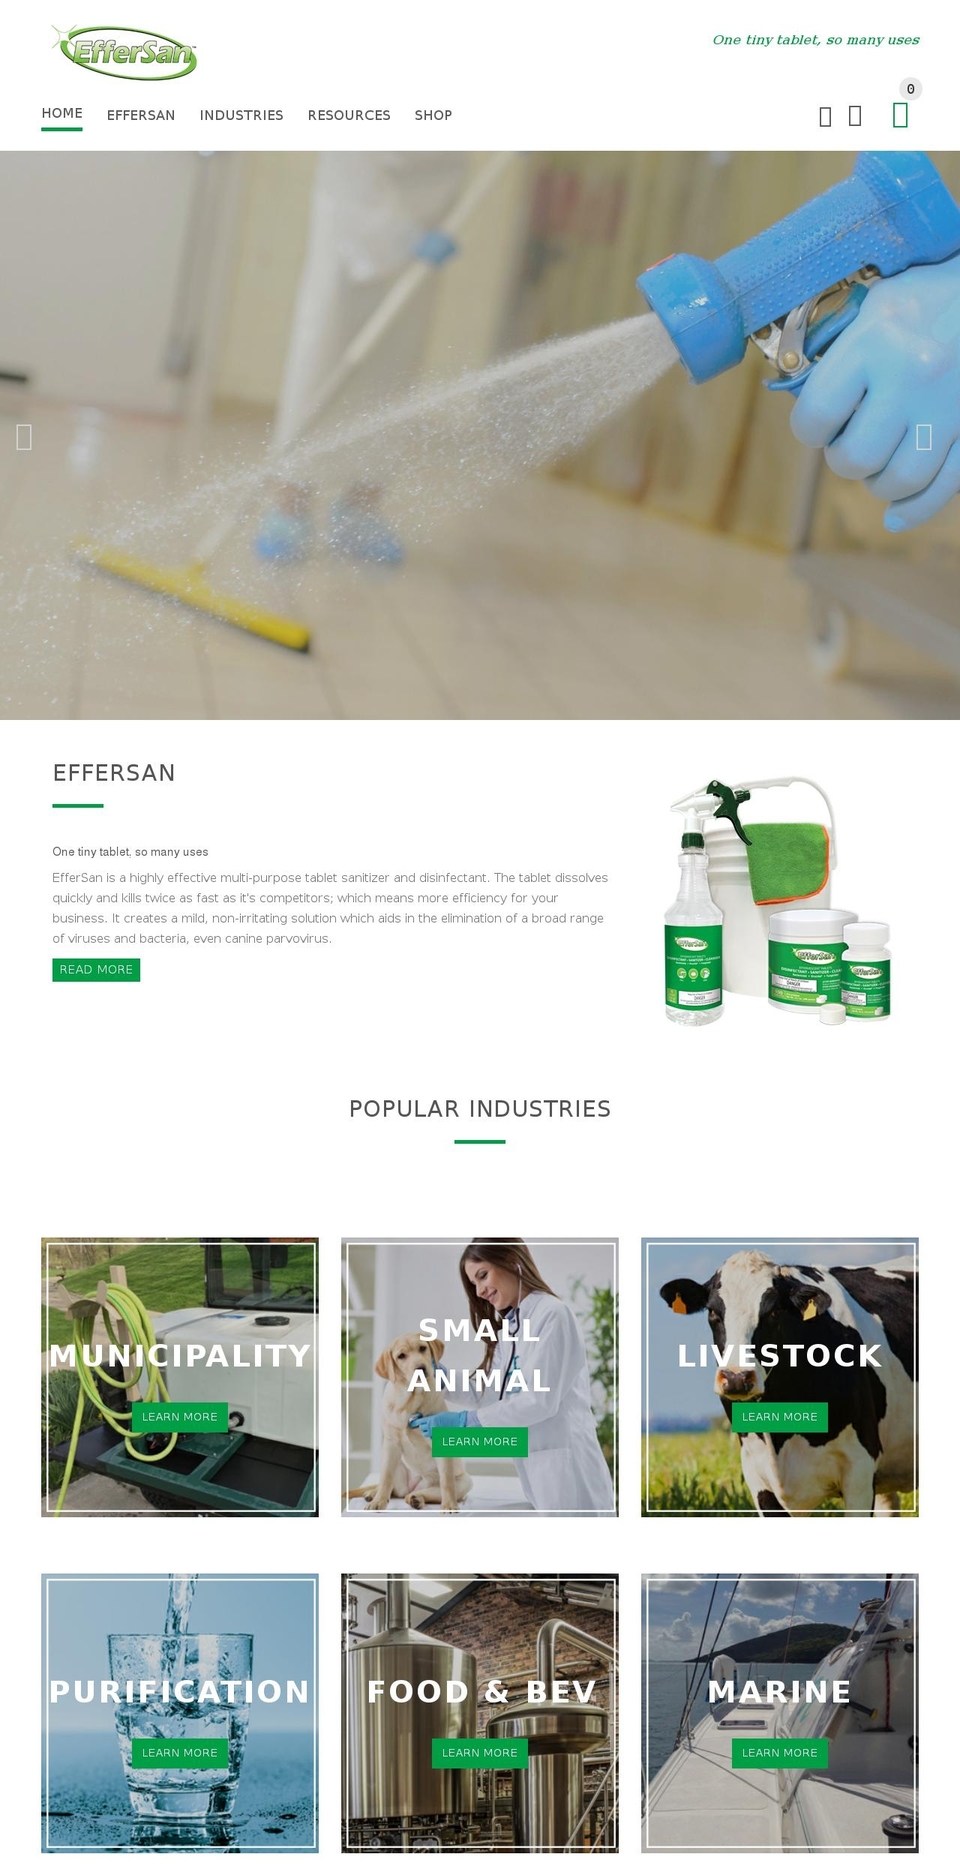 yourstore-v1-4-8 Shopify theme site example agbiosecurity.com